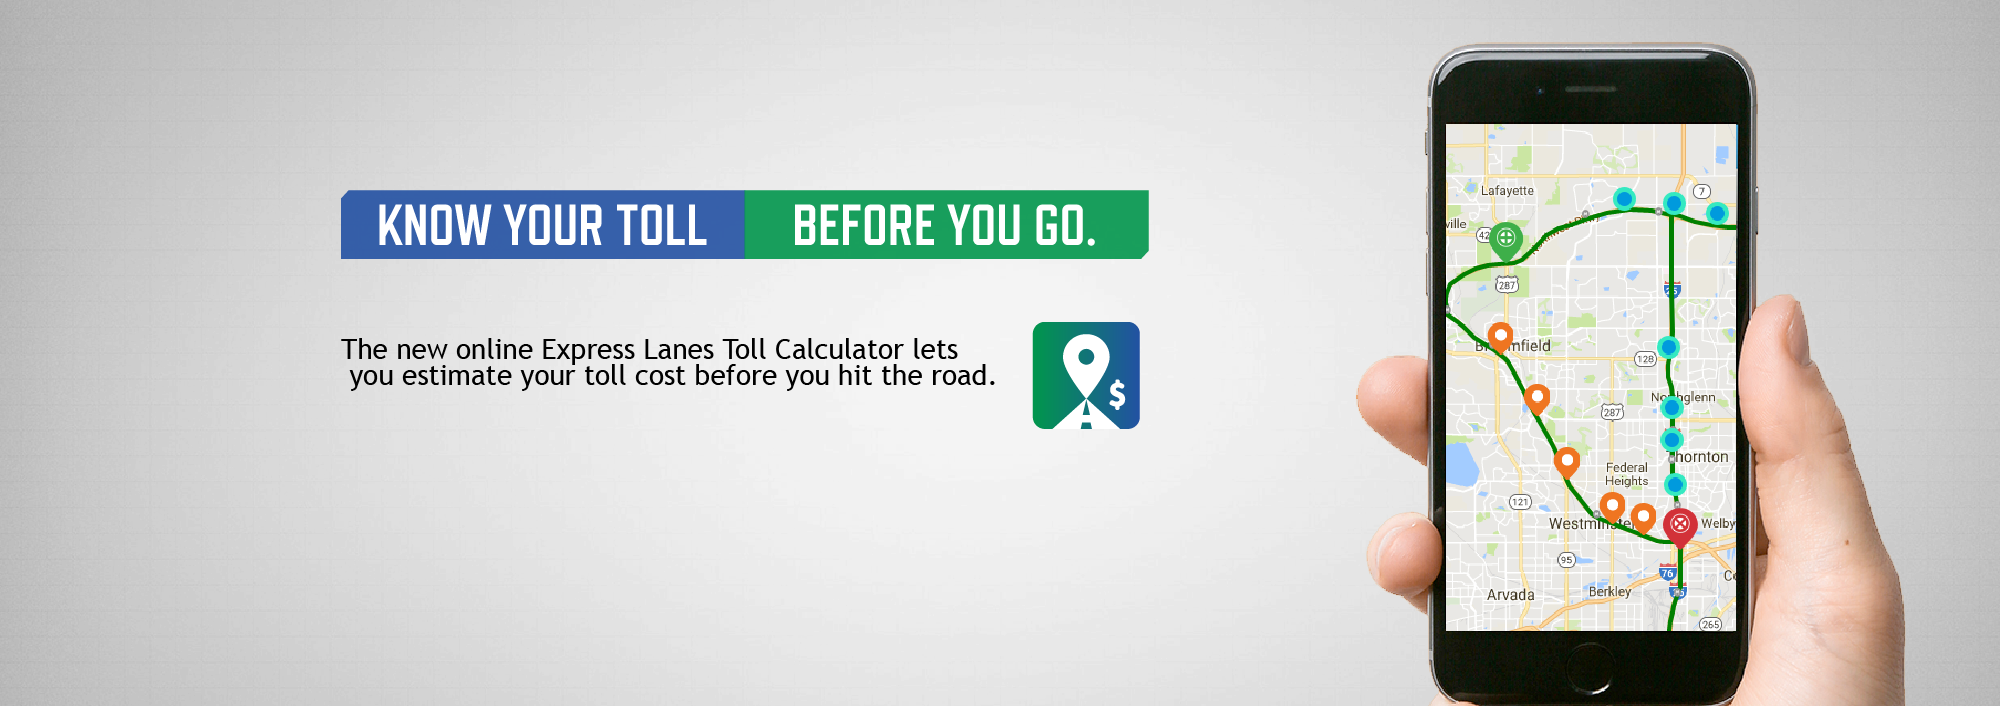 know-your-toll.png detail image